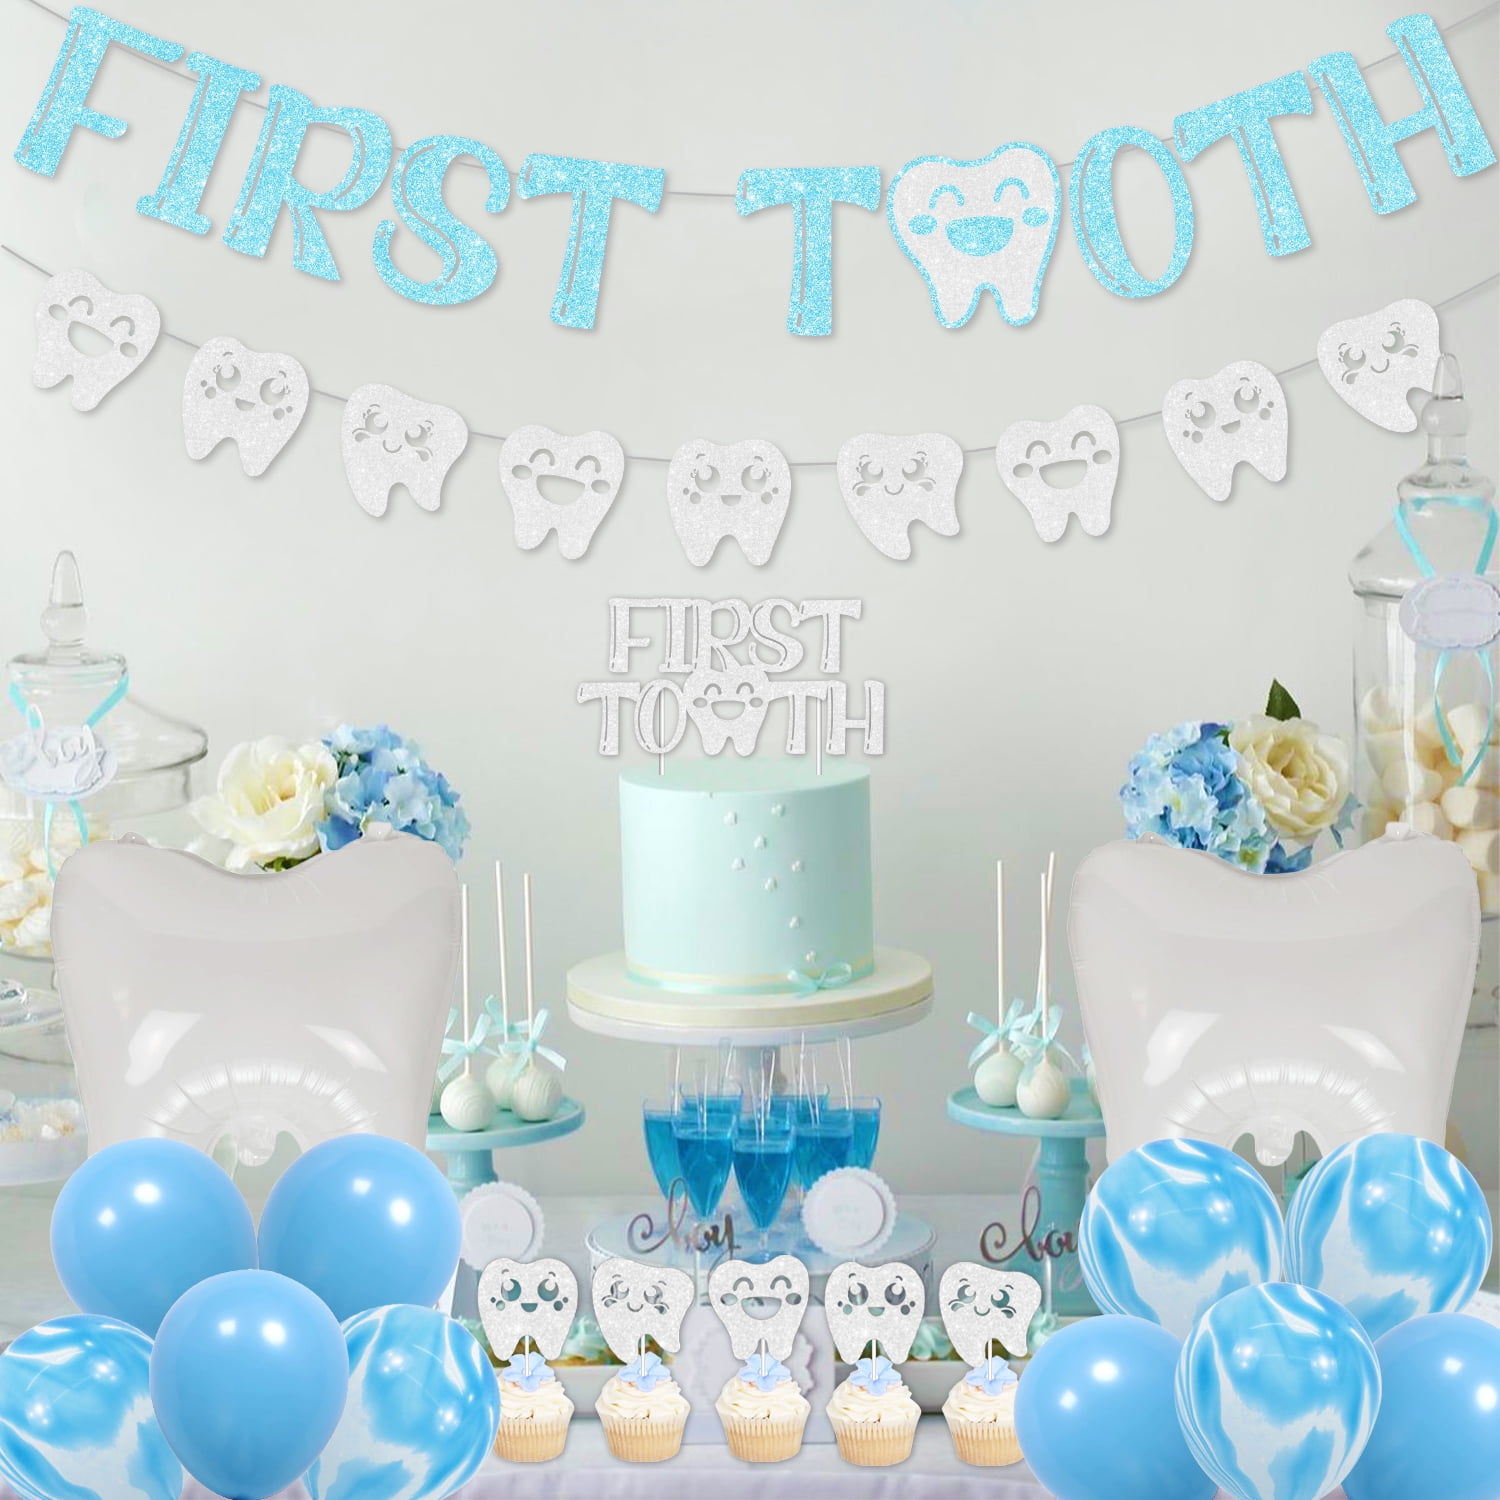 Baby's First Tooth Cake